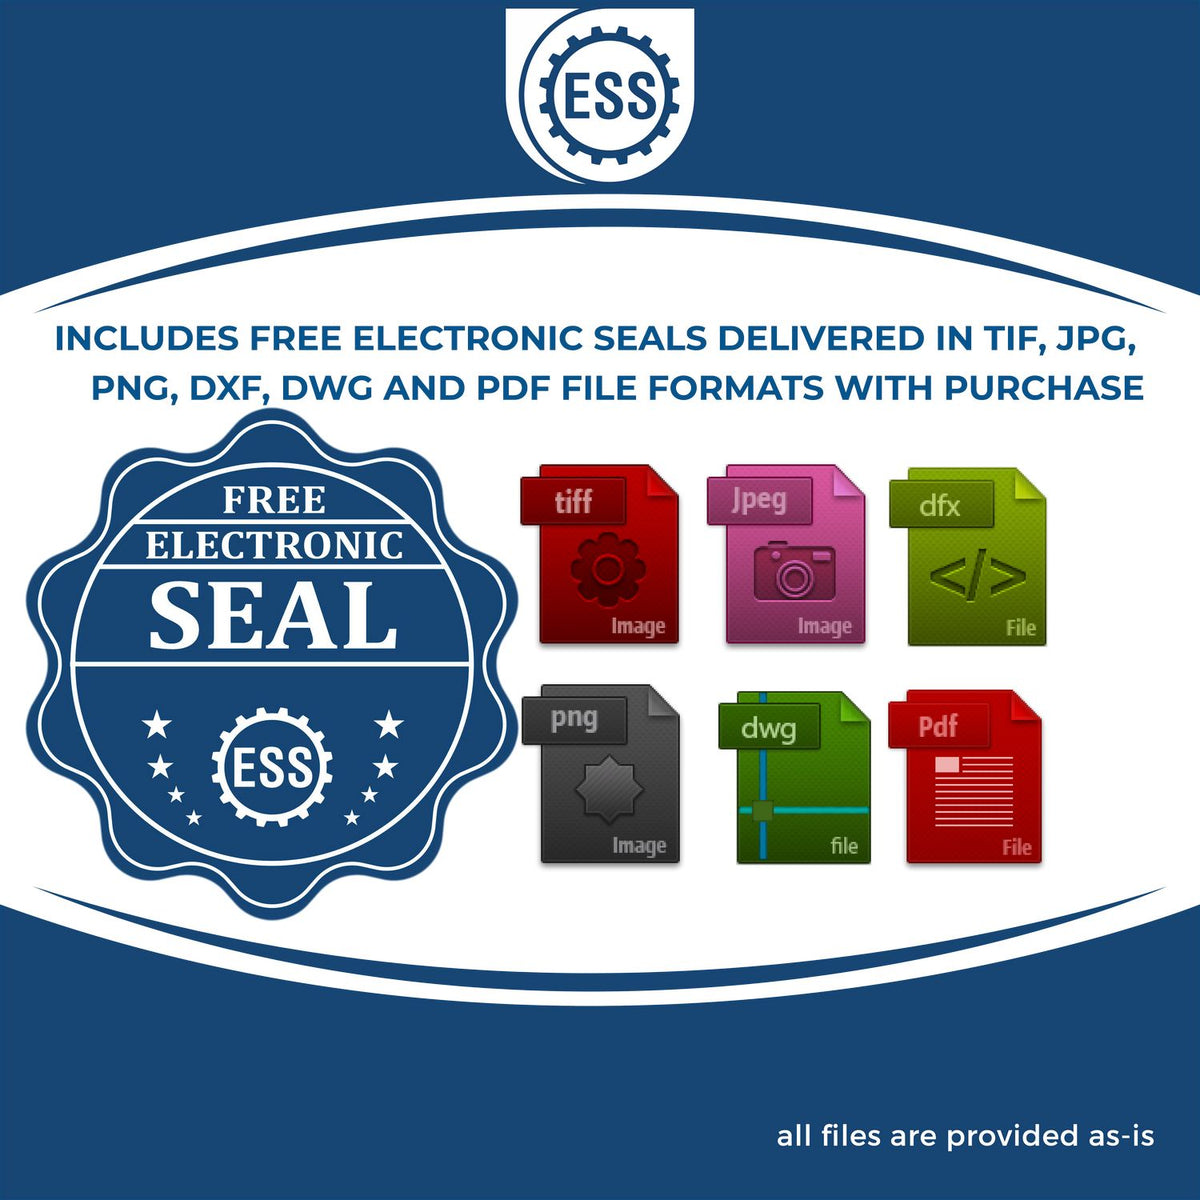 An infographic for the free electronic seal for the Gift Michigan Architect Seal illustrating the different file type icons such as DXF, DWG, TIF, JPG and PNG.